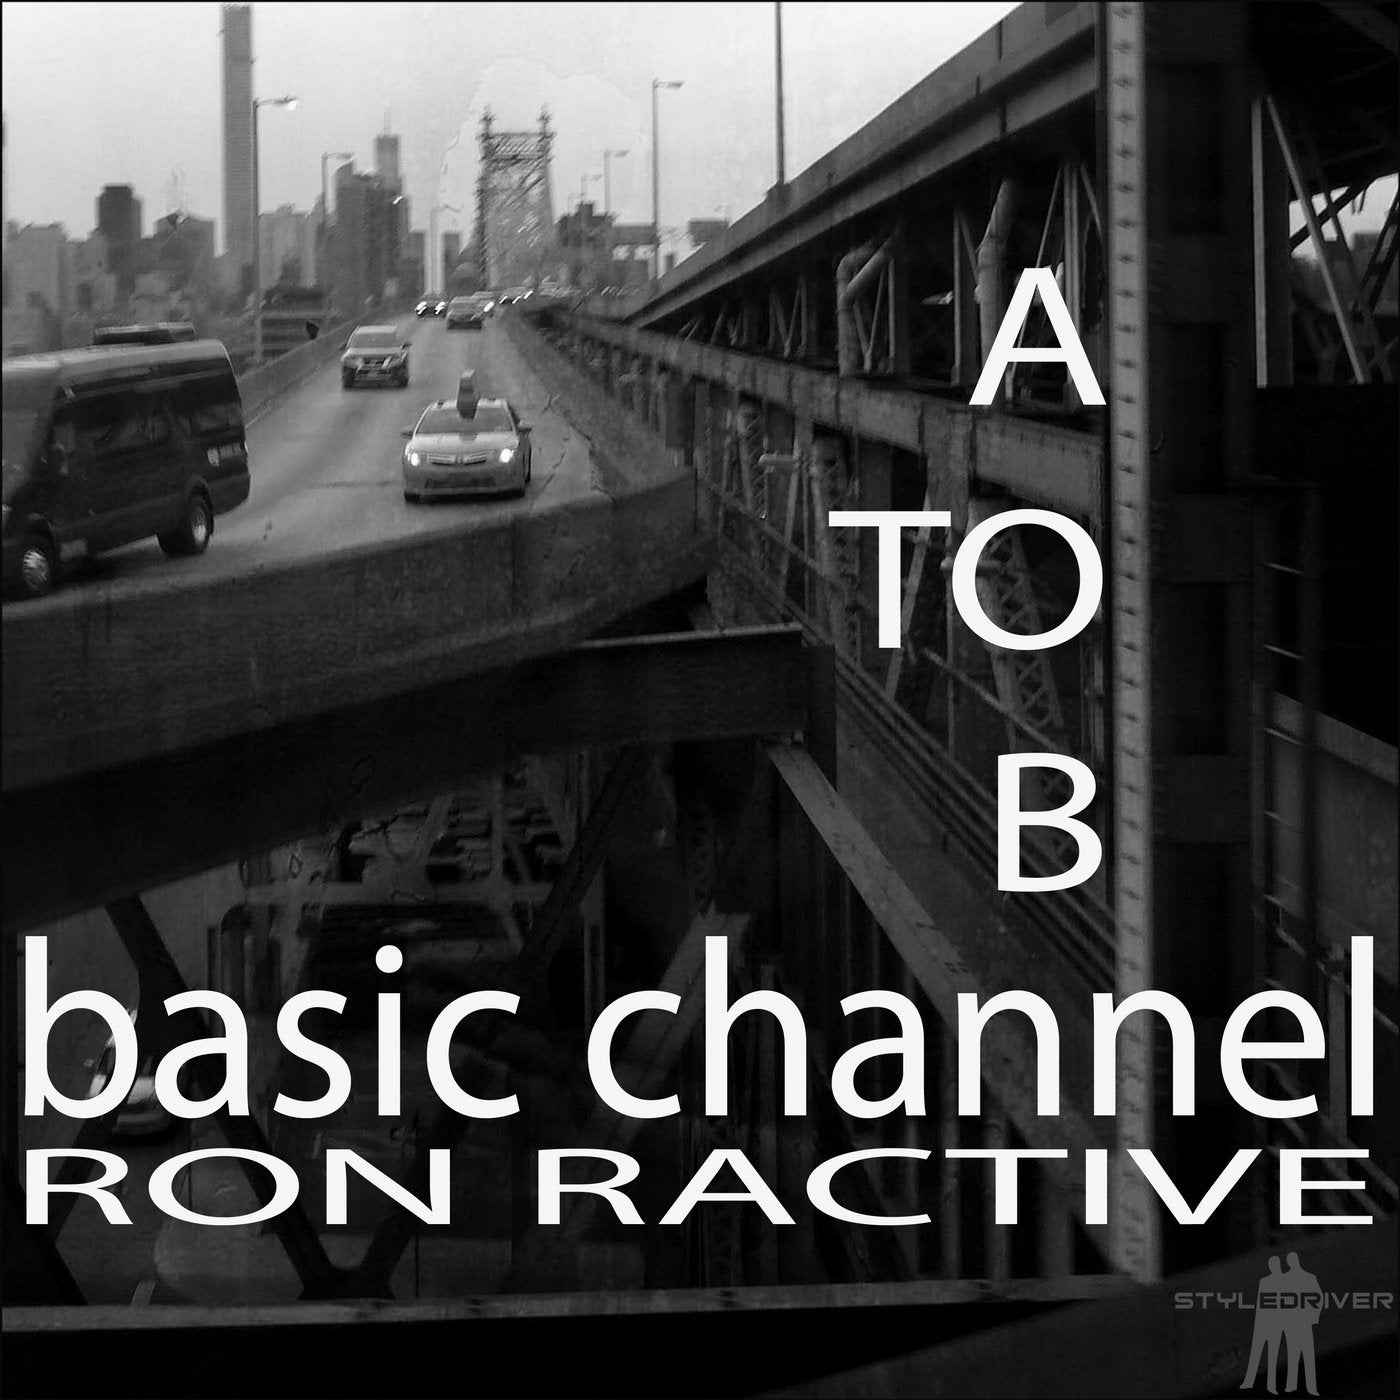 Basic Channel(A to B Versions)